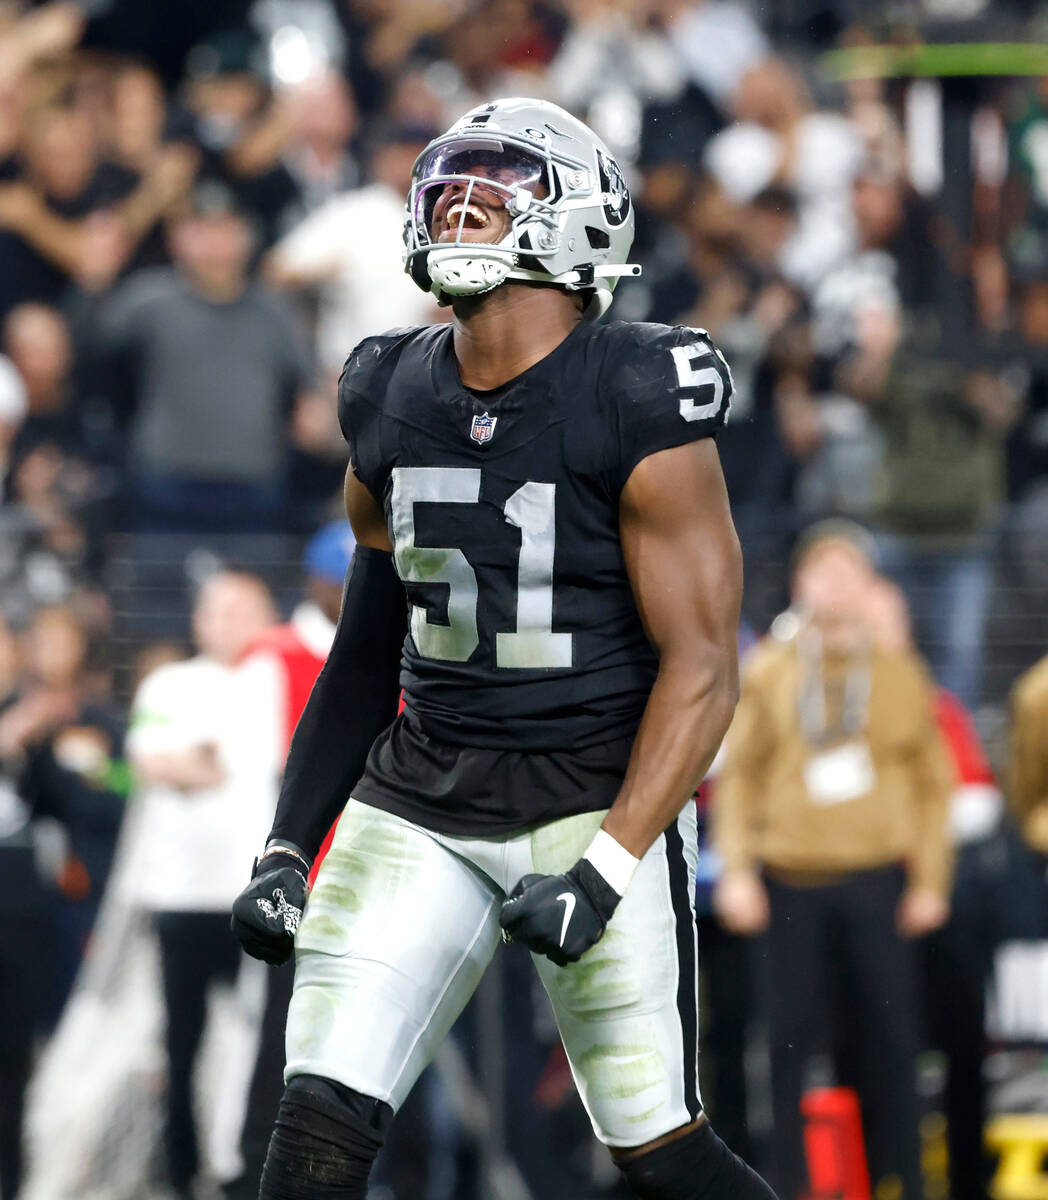 Raiders defensive end Malcolm Koonce (51) reacts after sacking New York Jets quarterback Zach W ...